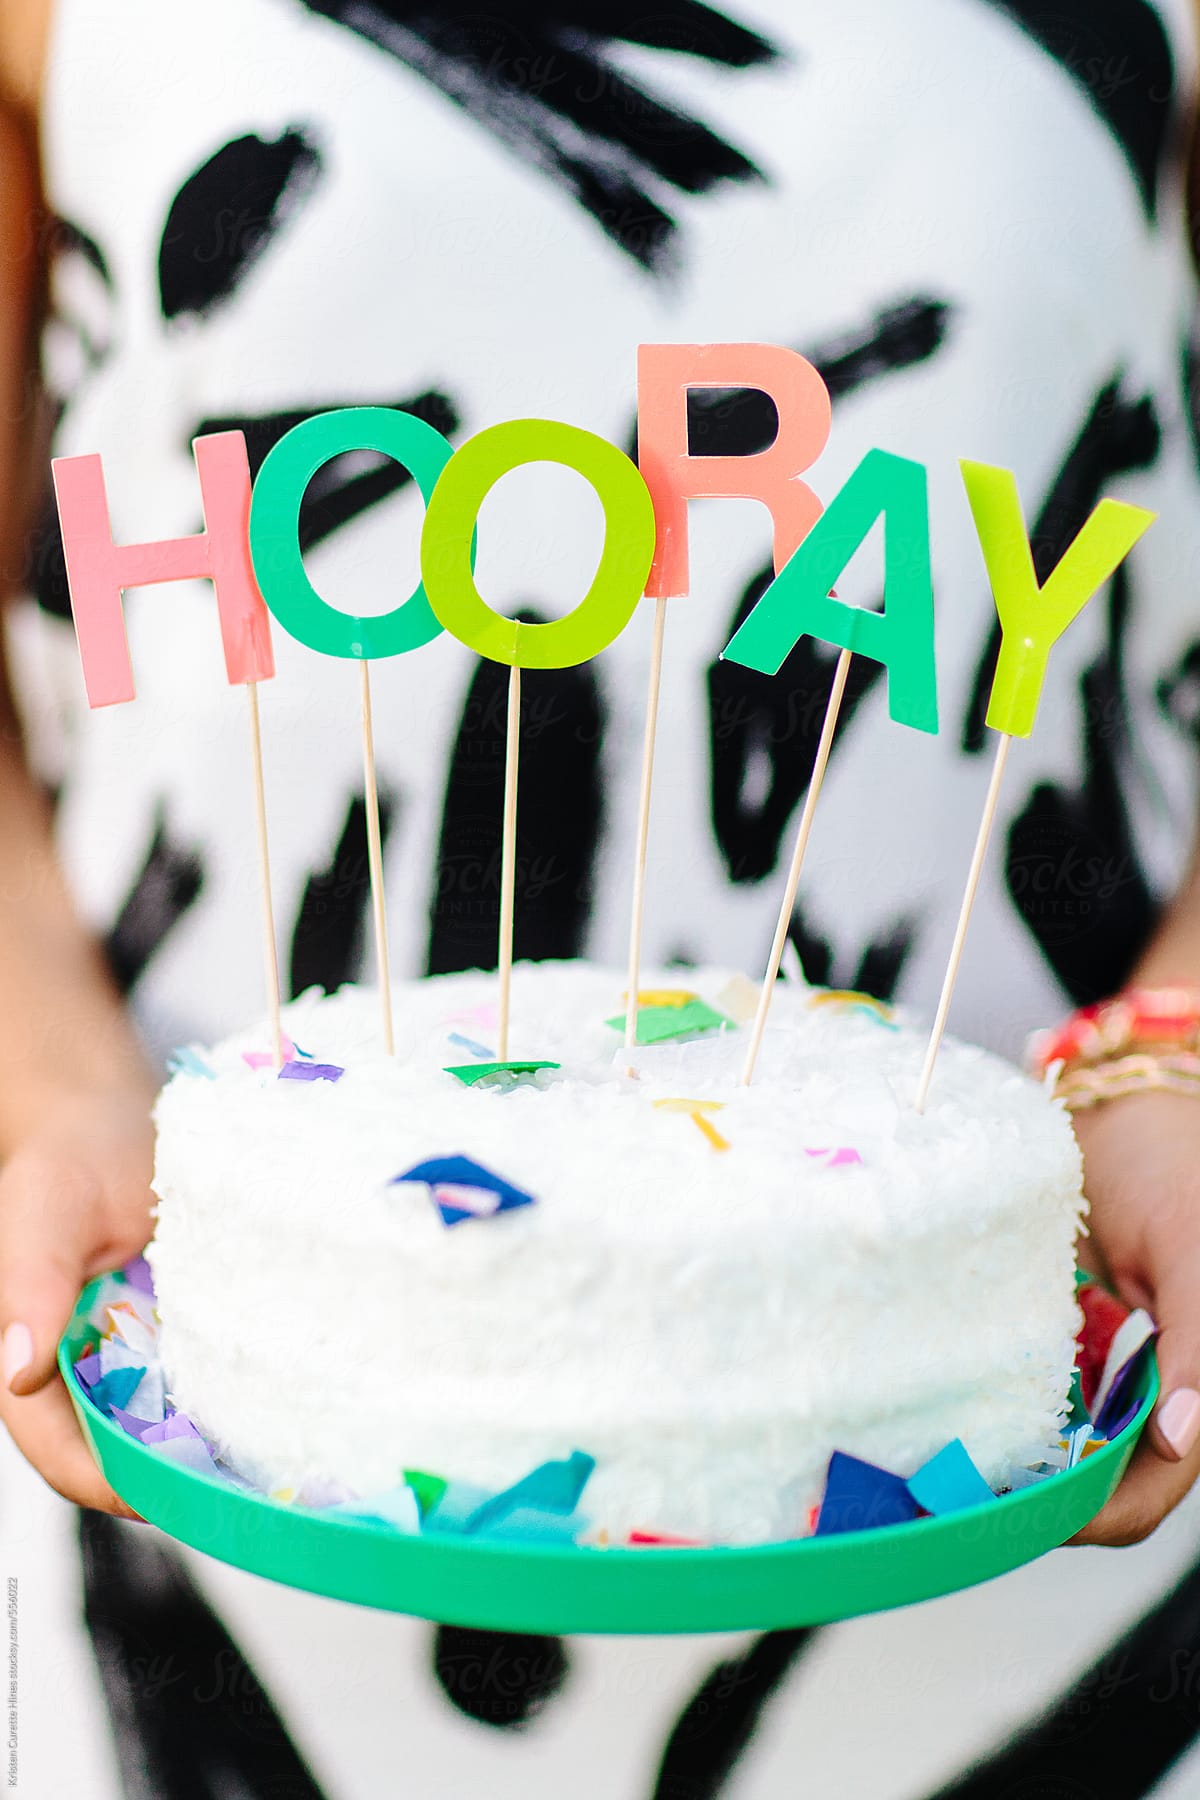 A woman holding a white cake that has the word HOORAY on the top